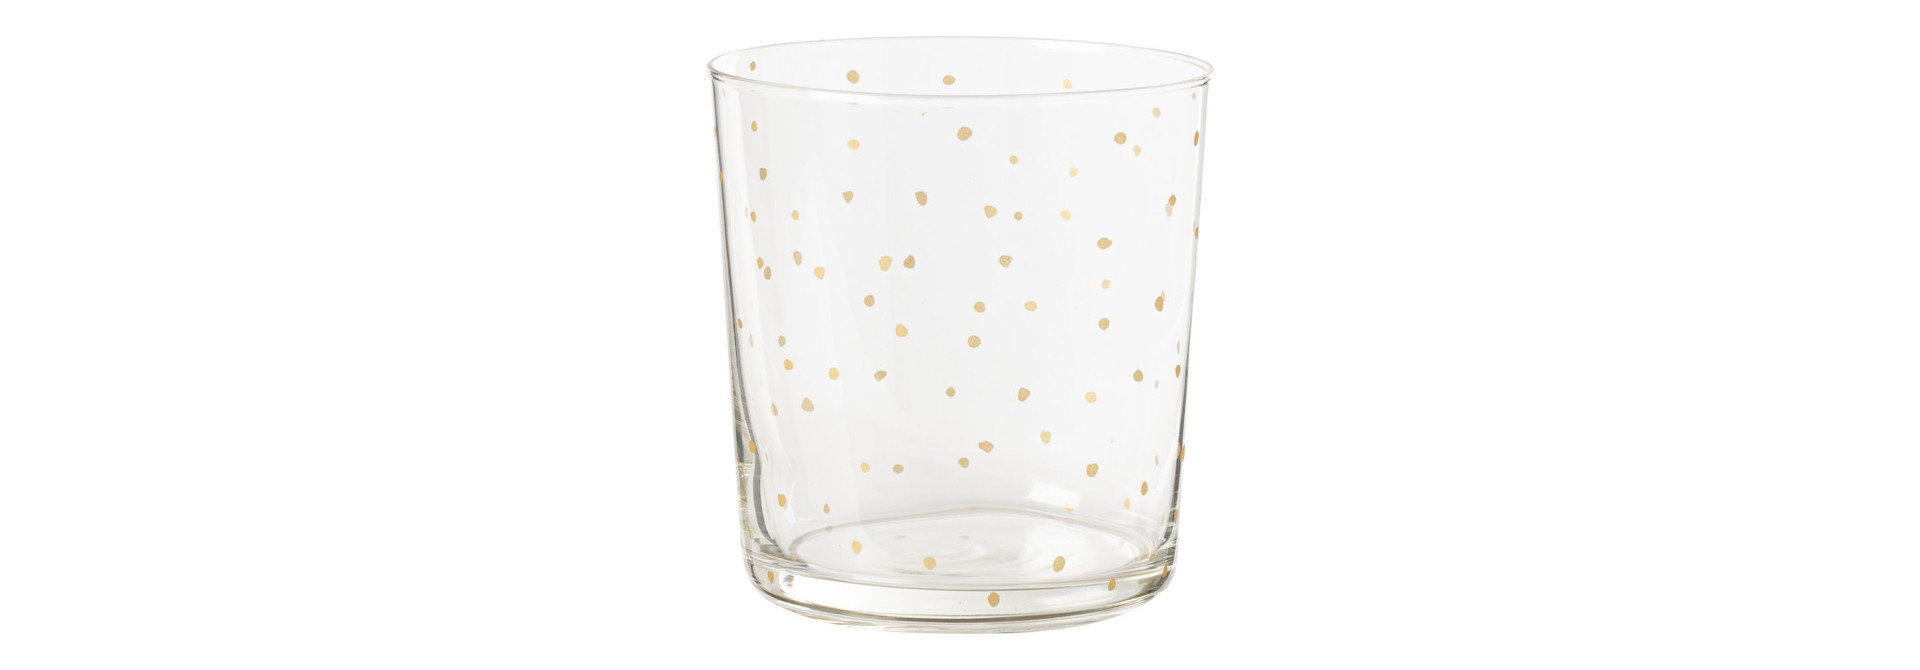 Holiday Glassware | The Deer Friends, Snowflake, & Polka Dot Collection